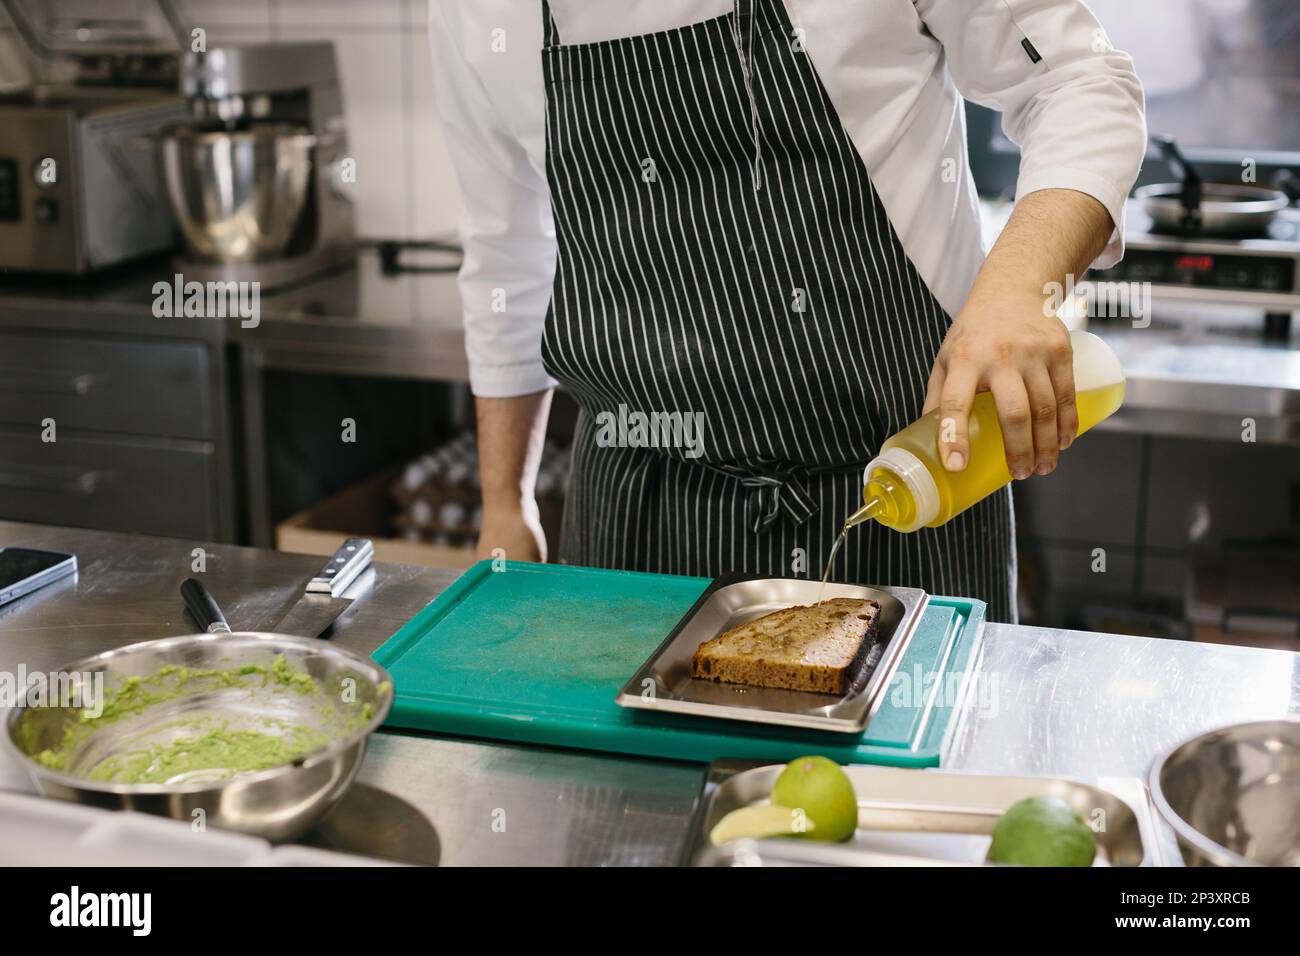 The chef is preparing food. Close-up of a male chef preparing avocado toast in a spacious modern kitchen. Stock Photo